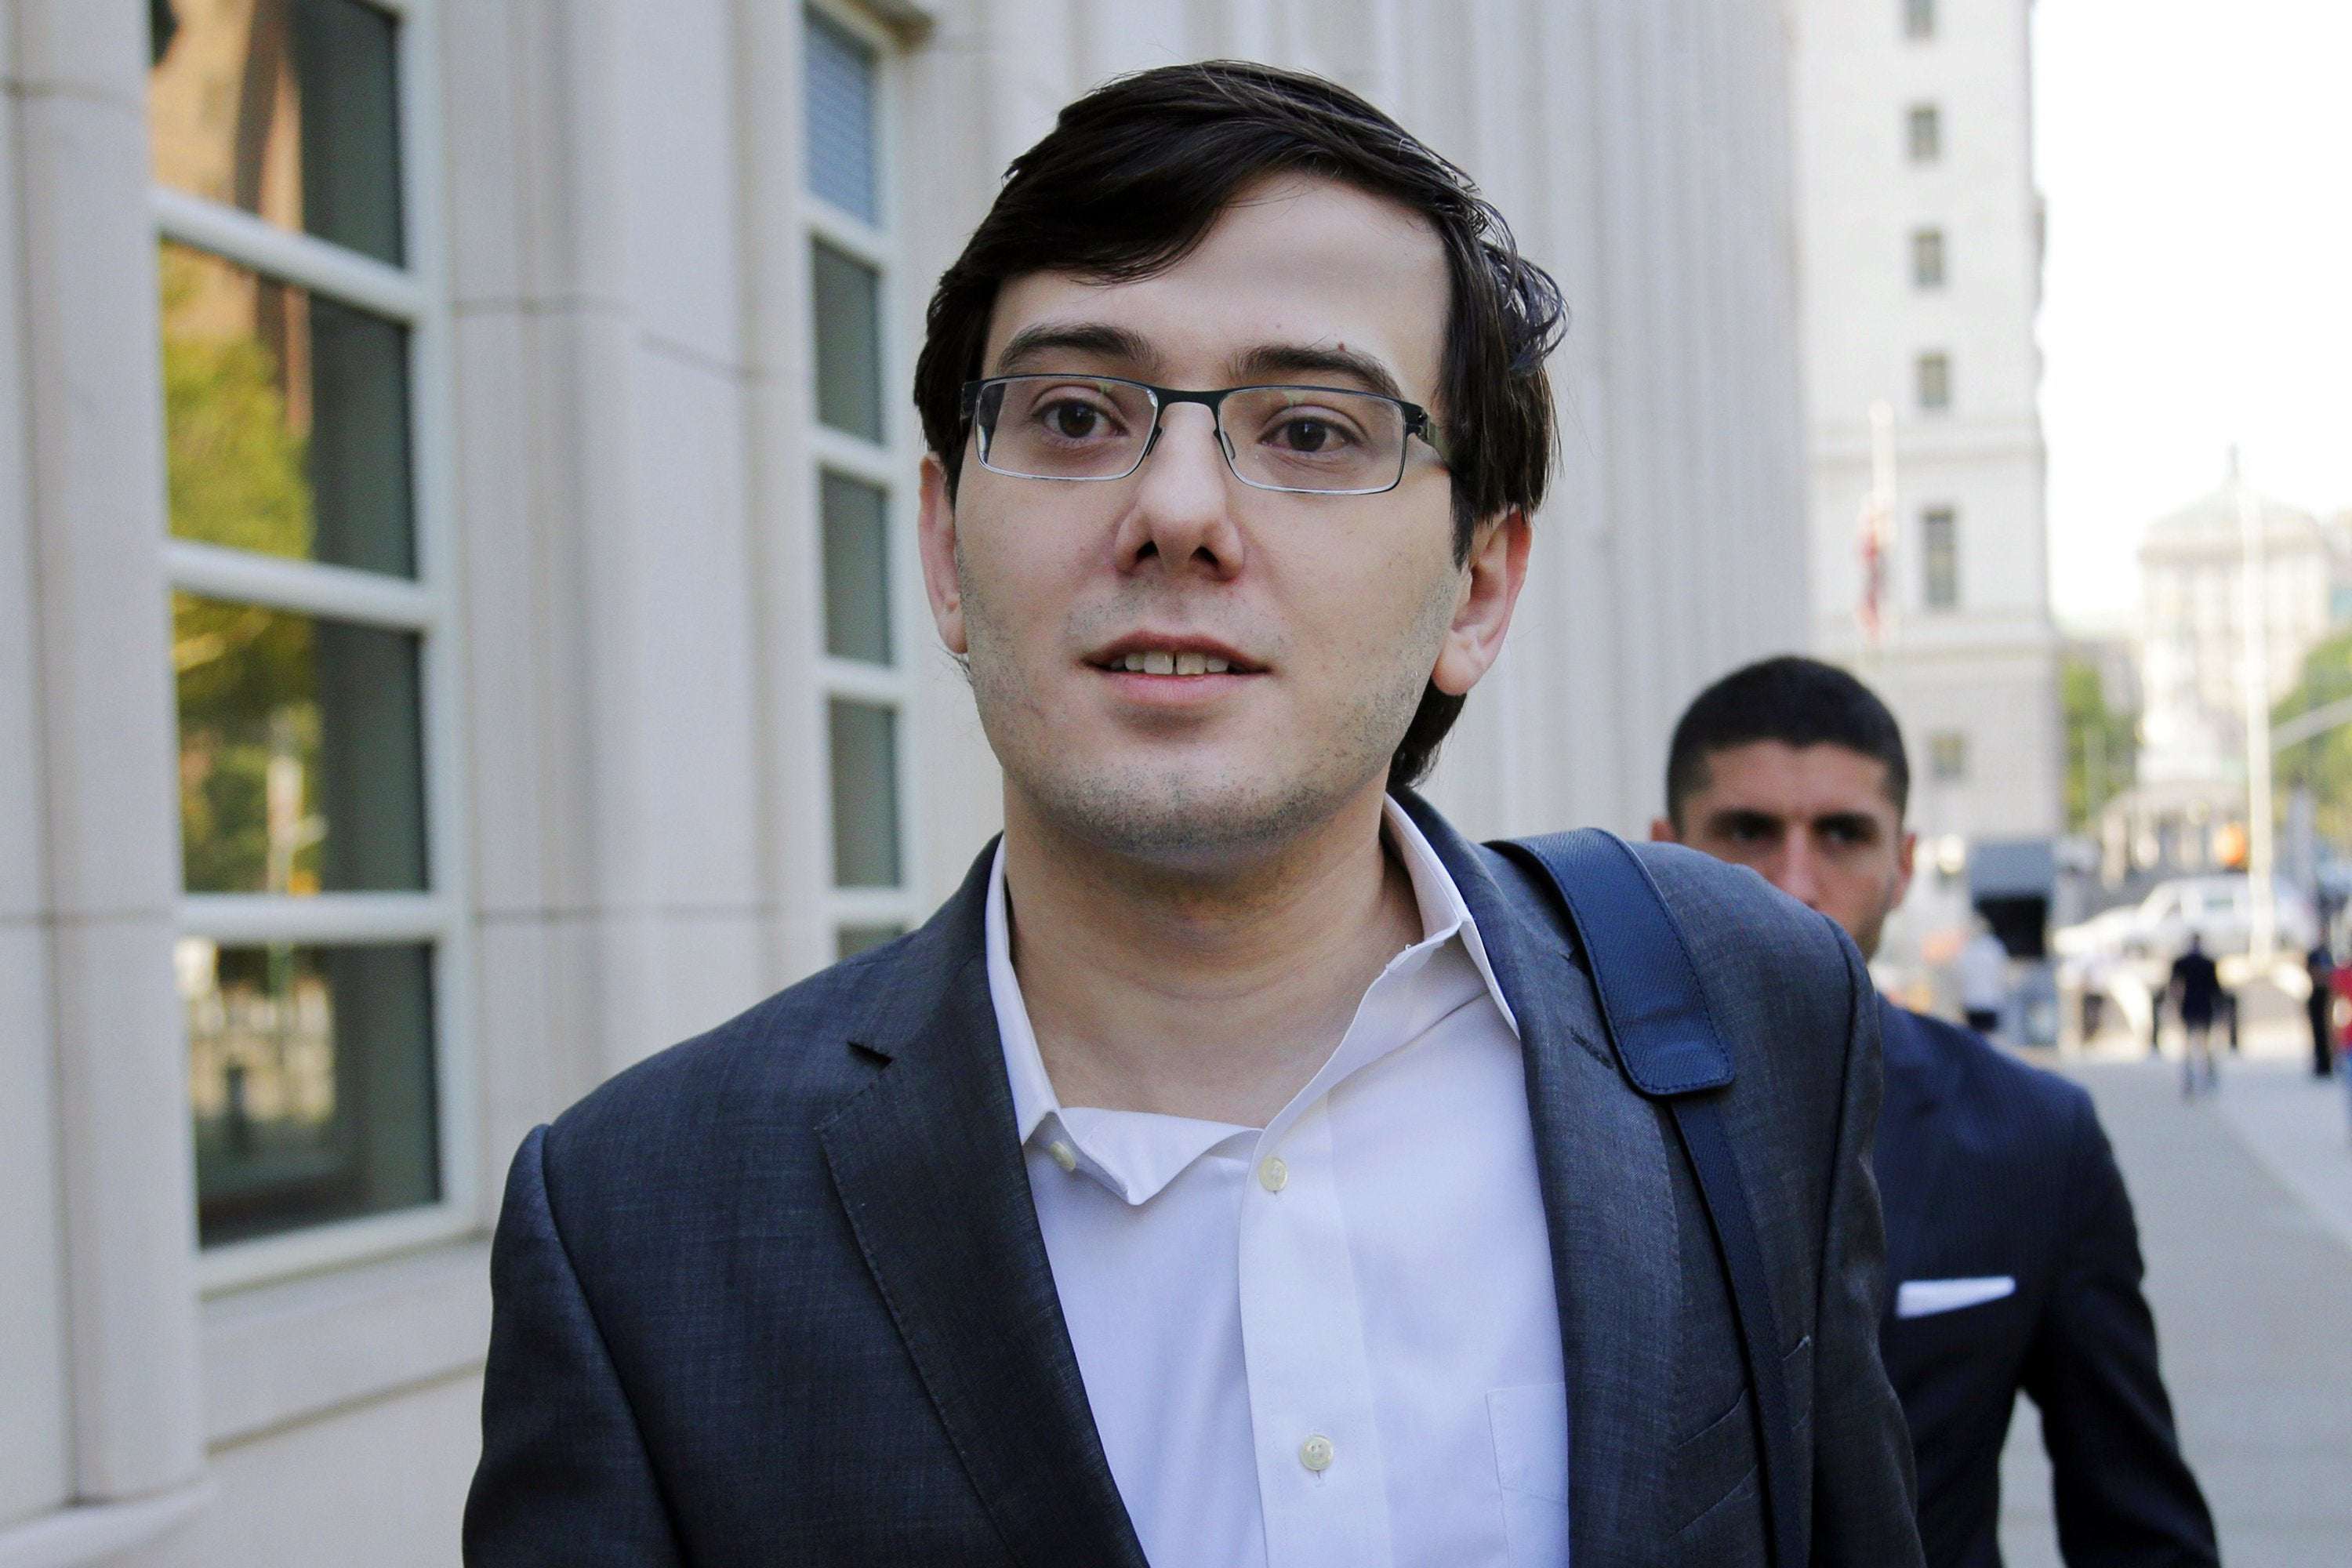 image for ‘Pharma Bro’ Shkreli loses 2nd bid for early prison release